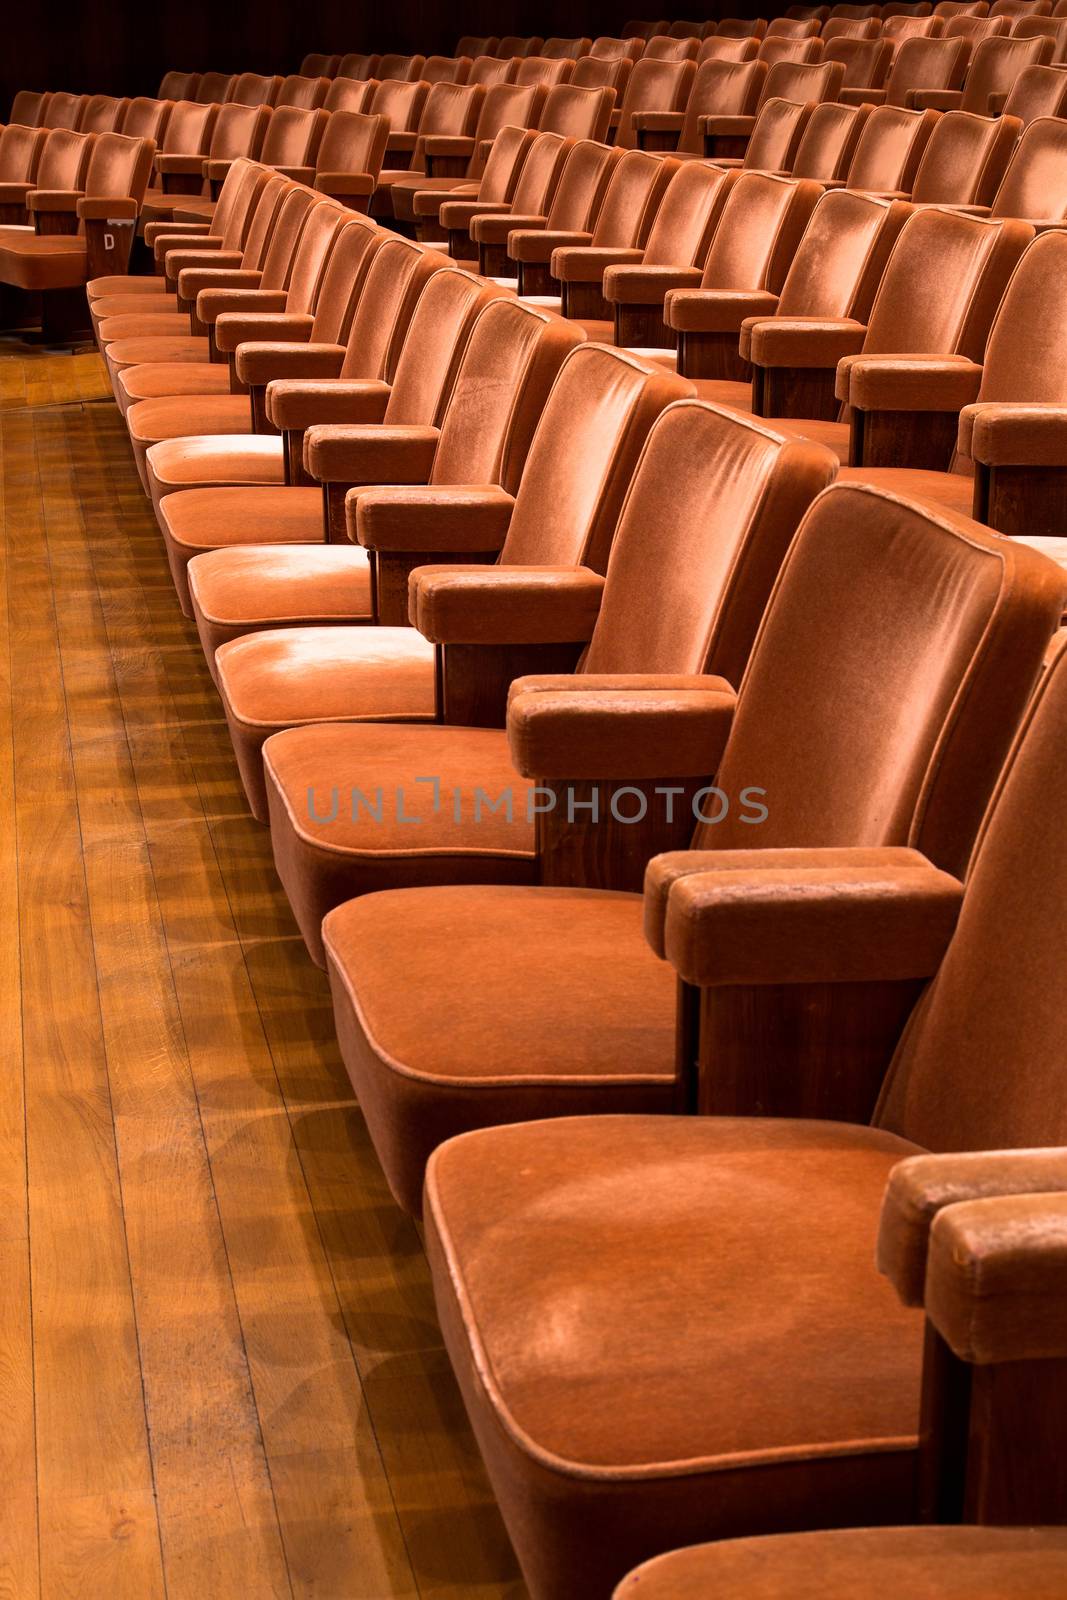 Rows of brown theater seats in a concert hall